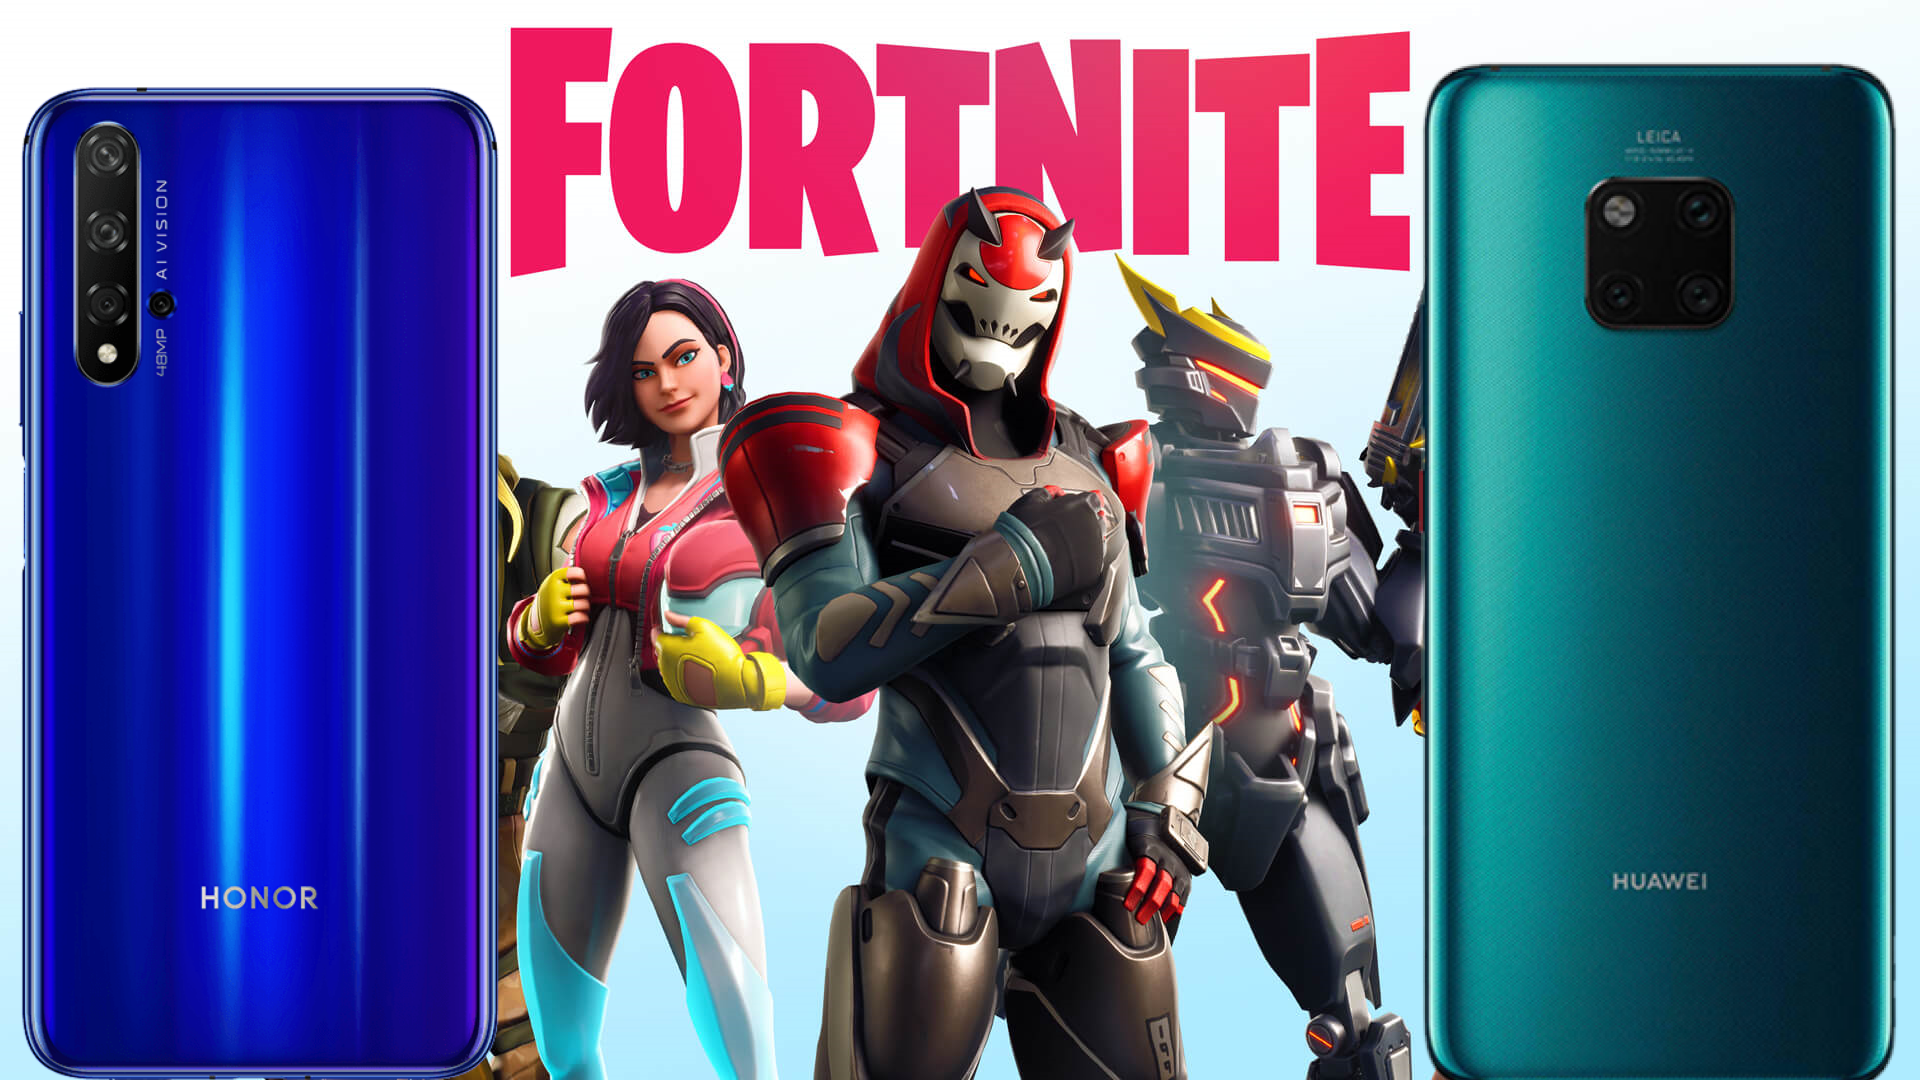 Fortnite Mobile Honor 7x Moviles Honor Y Huawei Compatibles Con Fortnite